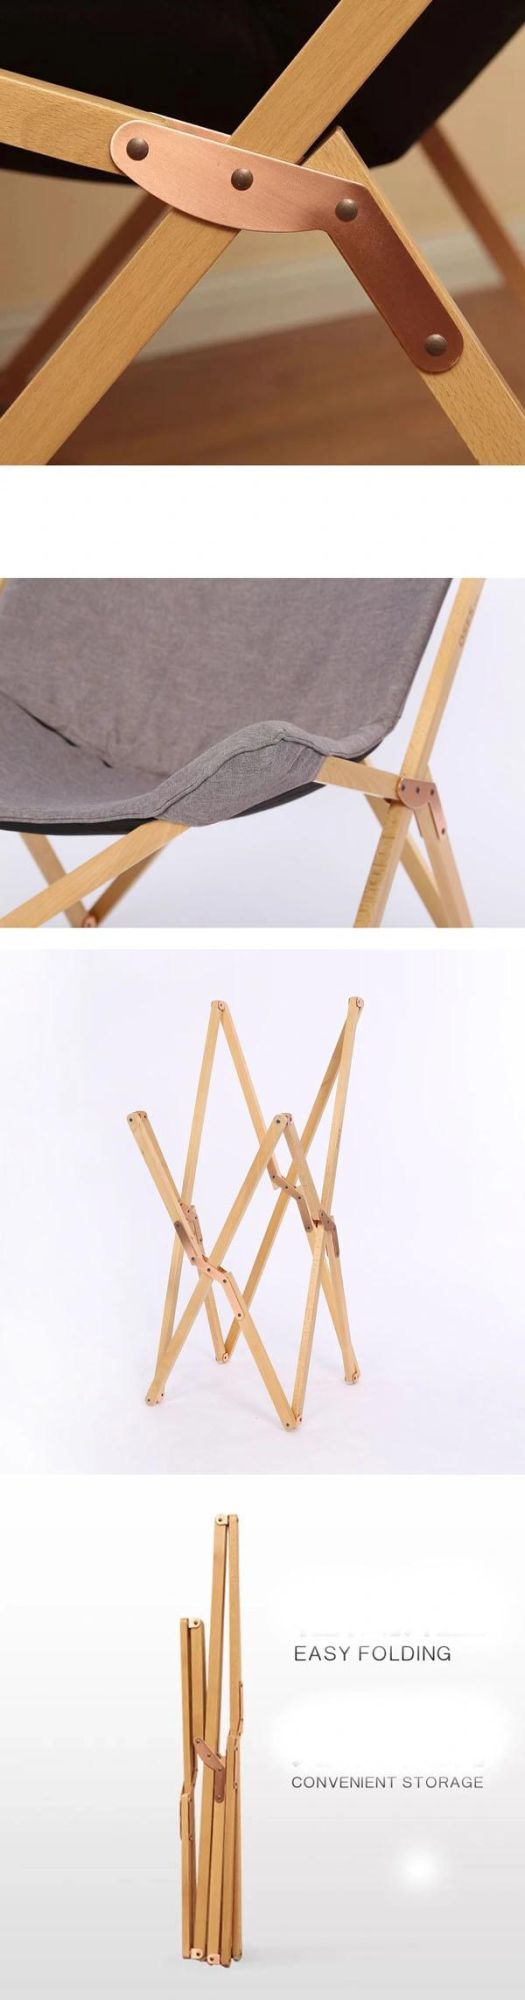 Wholesale Best Hiking Outdoor Lightweight Folding Solid Beech Wood Camping Chair